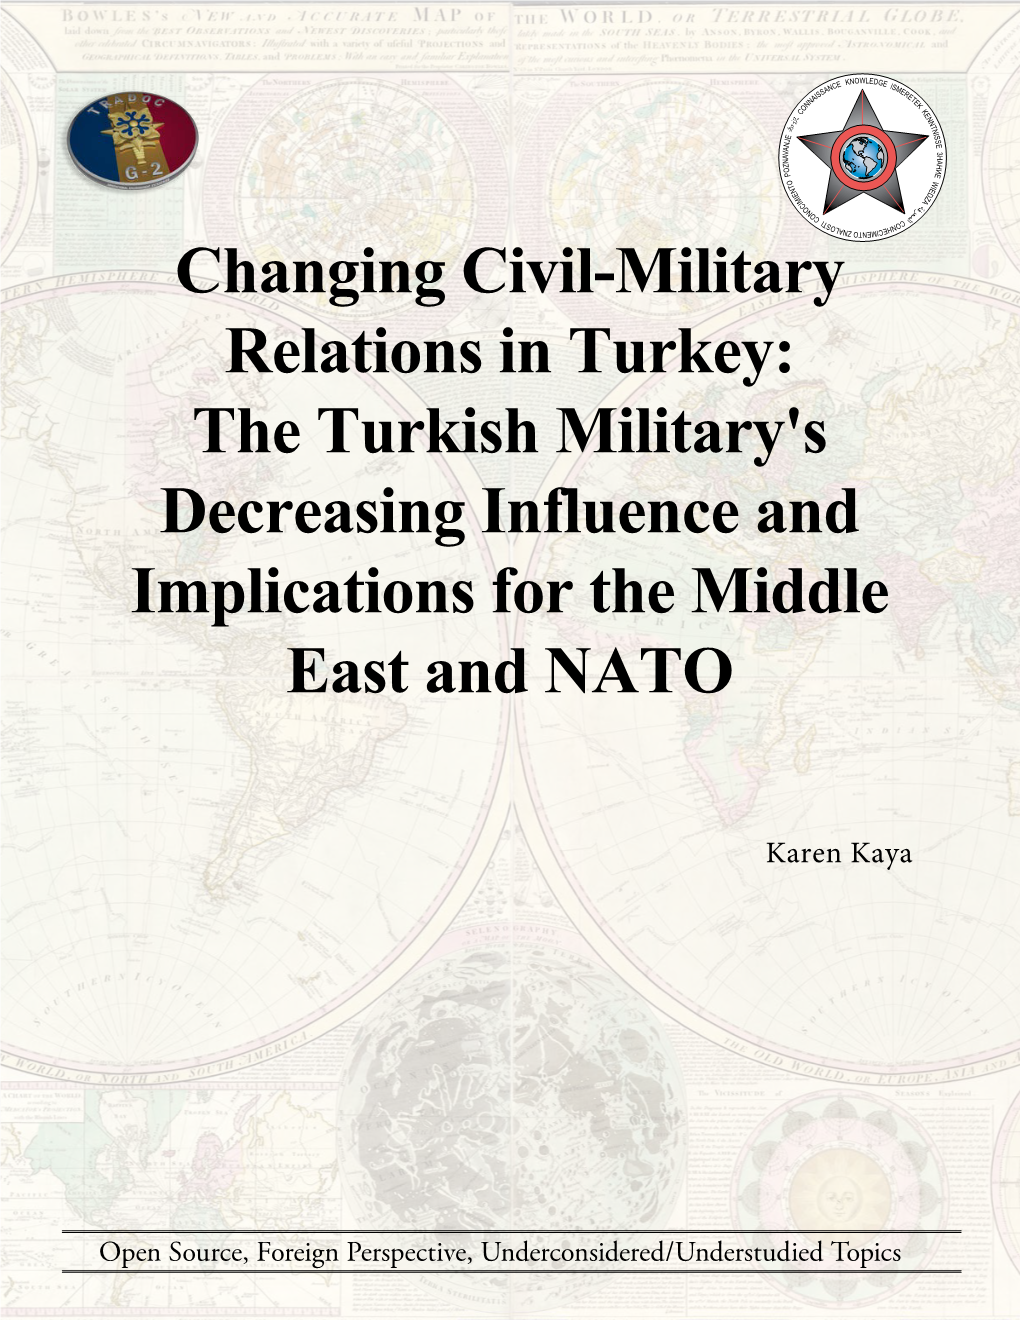 Changing Civil-Military Relations in Turkey: the Turkish Military's Decreasing Influence and Implications for the Middle East and NATO